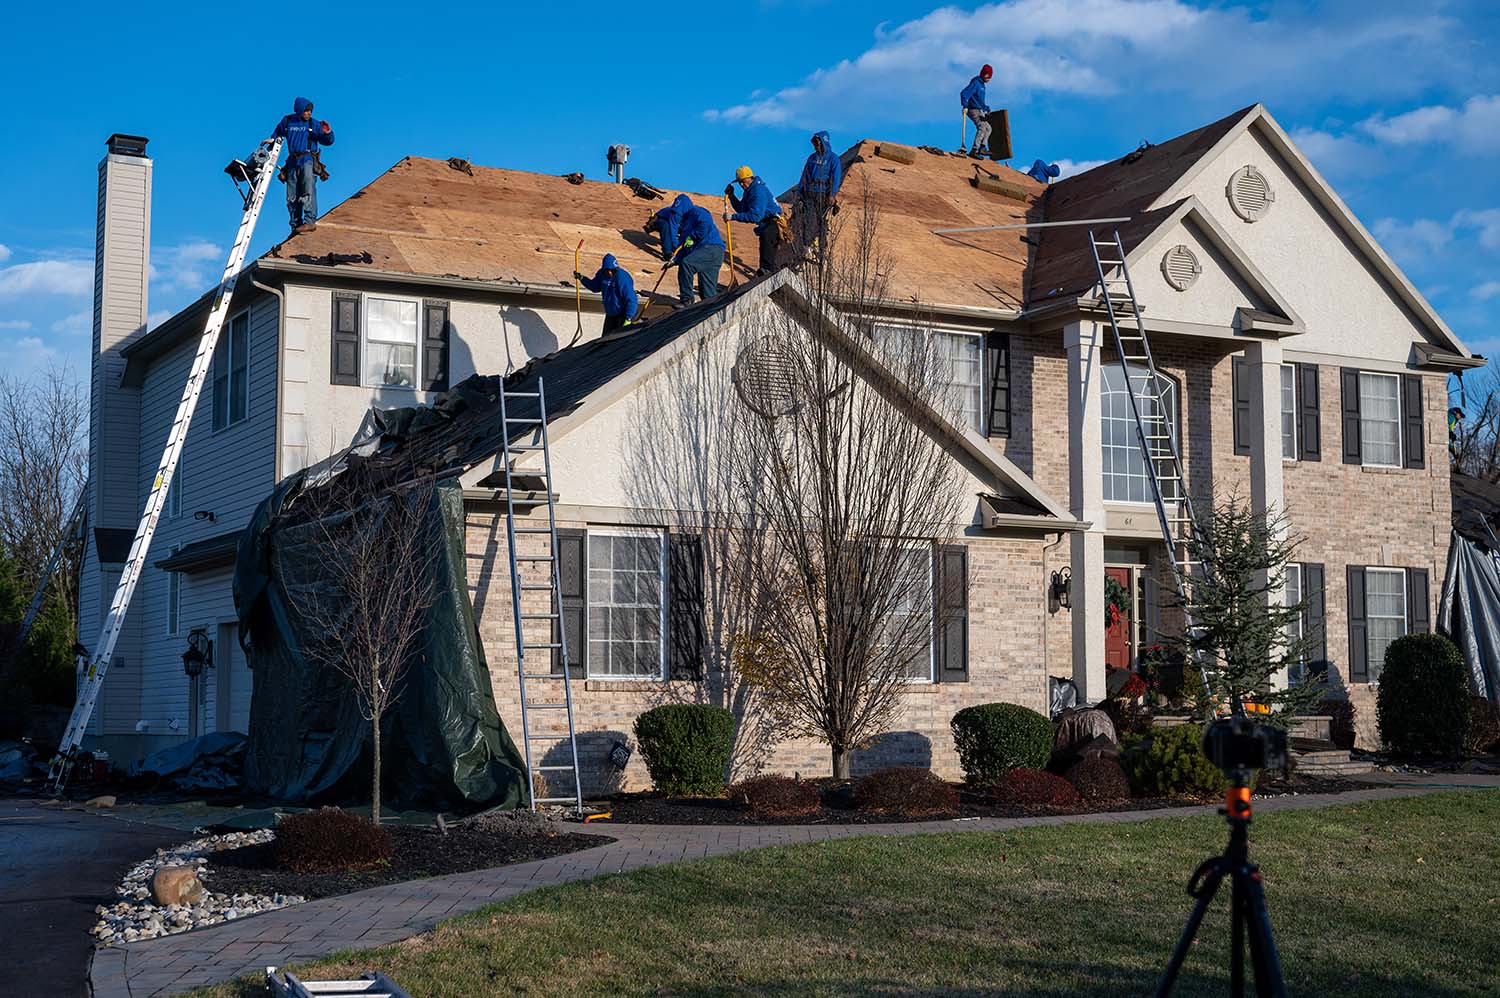 Easton, PA Roofing repair company - residential roofing contractors in Easton, PA (medium image)